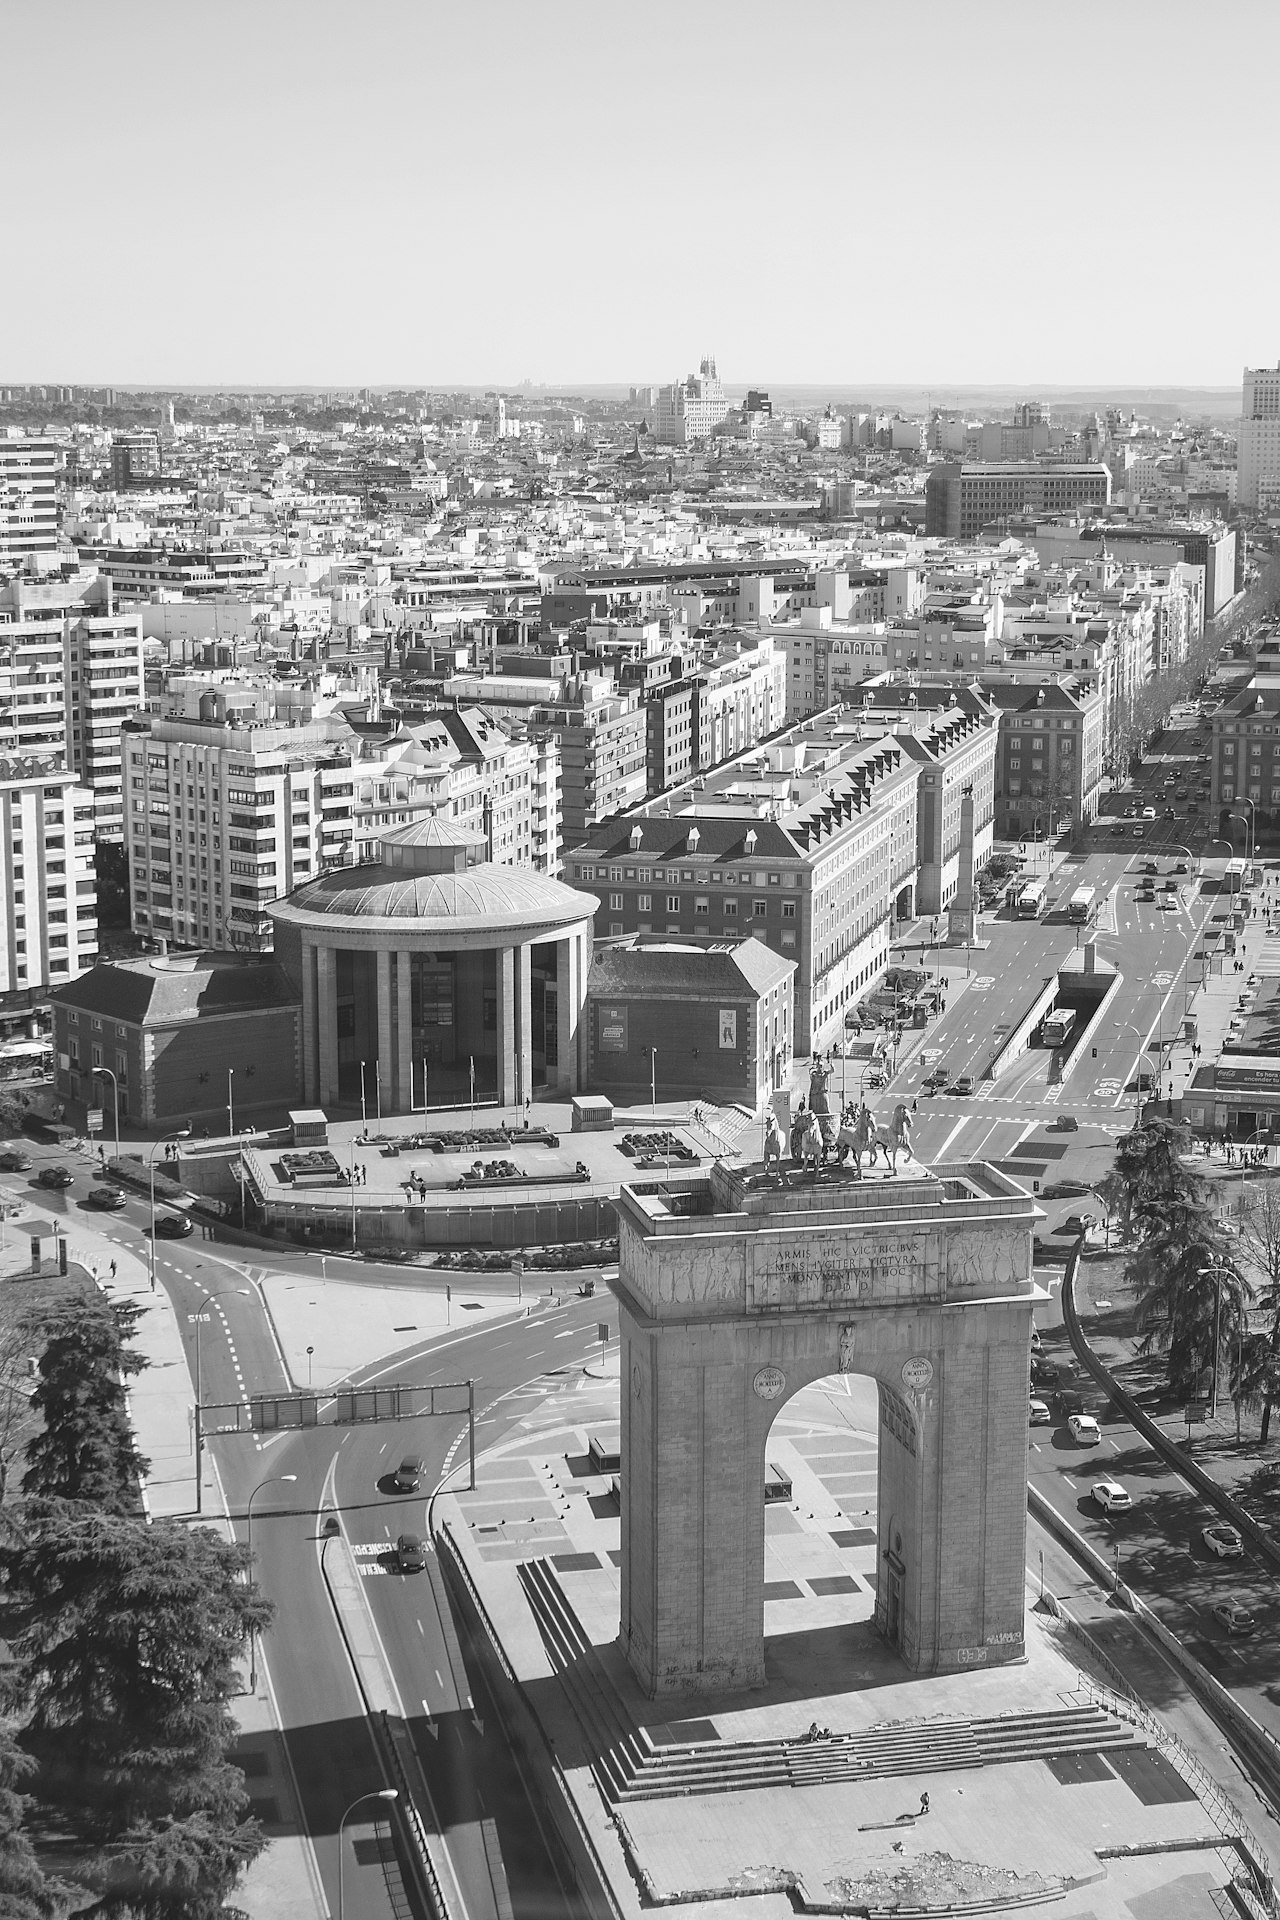 an aerial view of moncloa with a clock tower